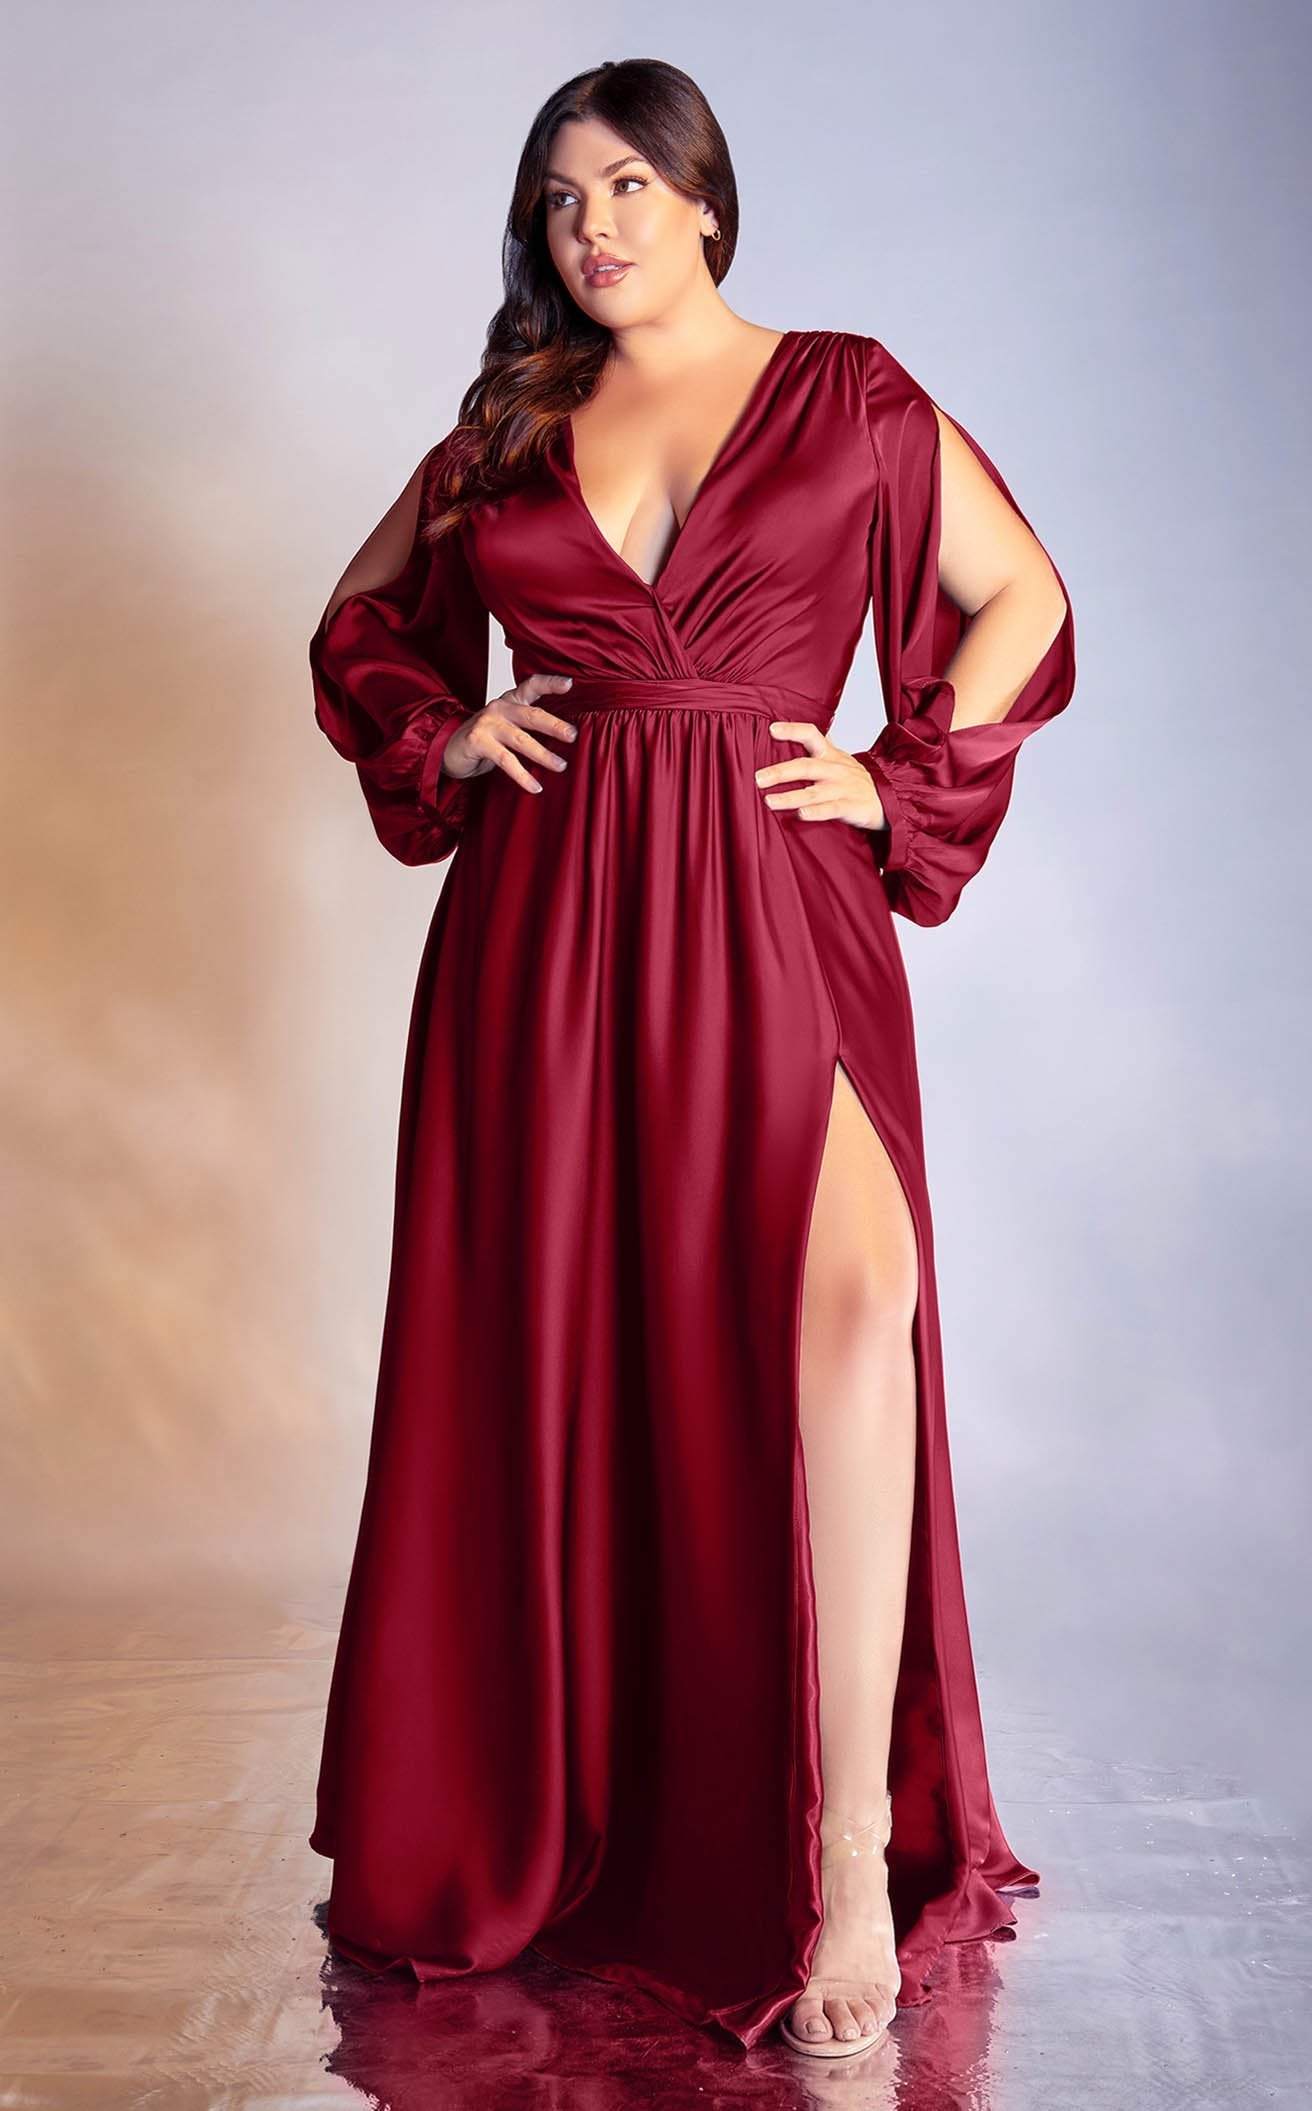 Rose Gold Cinderella Divine CH165C Plus Size Strapless Sexy Long Prom Dress  for $99.0, – The Dress Outlet